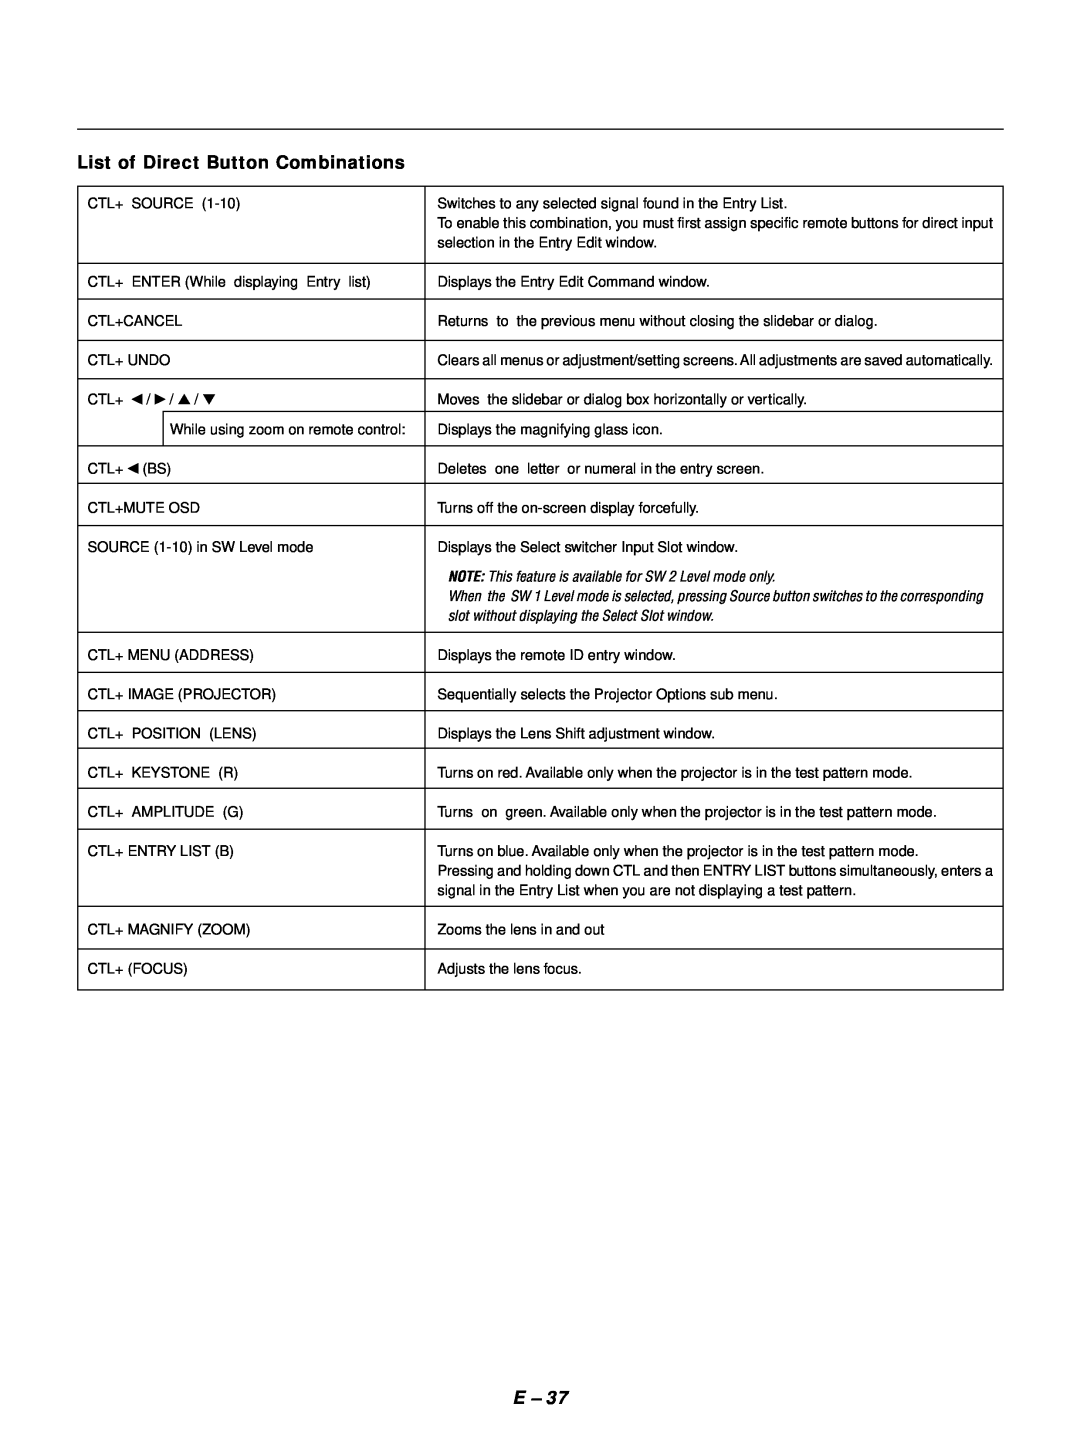 NEC GT1150 user manual List of Direct Button Combinations, NOTE This feature is available for SW 2 Level mode only 